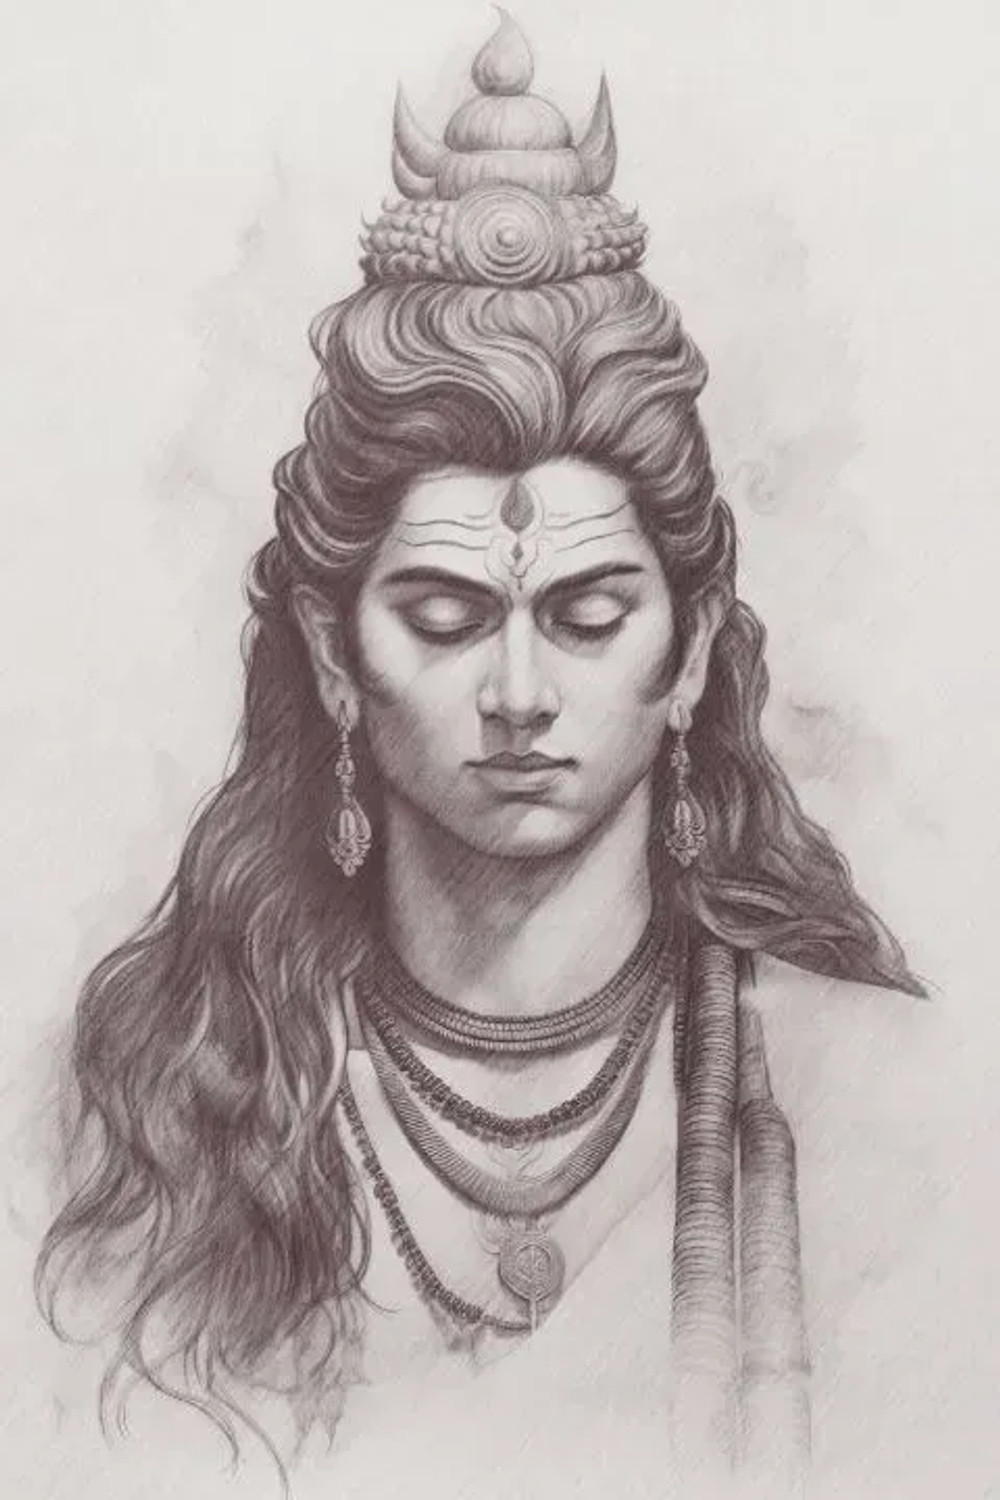 Vidyut Jammwal Instagram – Thank you @shatanik. What a great sketch.  EVERYONE HAS A SHIVA WITHIN. #Repost @shatanik (@get_repost) ・・・ LORD SHIVA  🔱 Couldn't find any better face for the portrait 😁